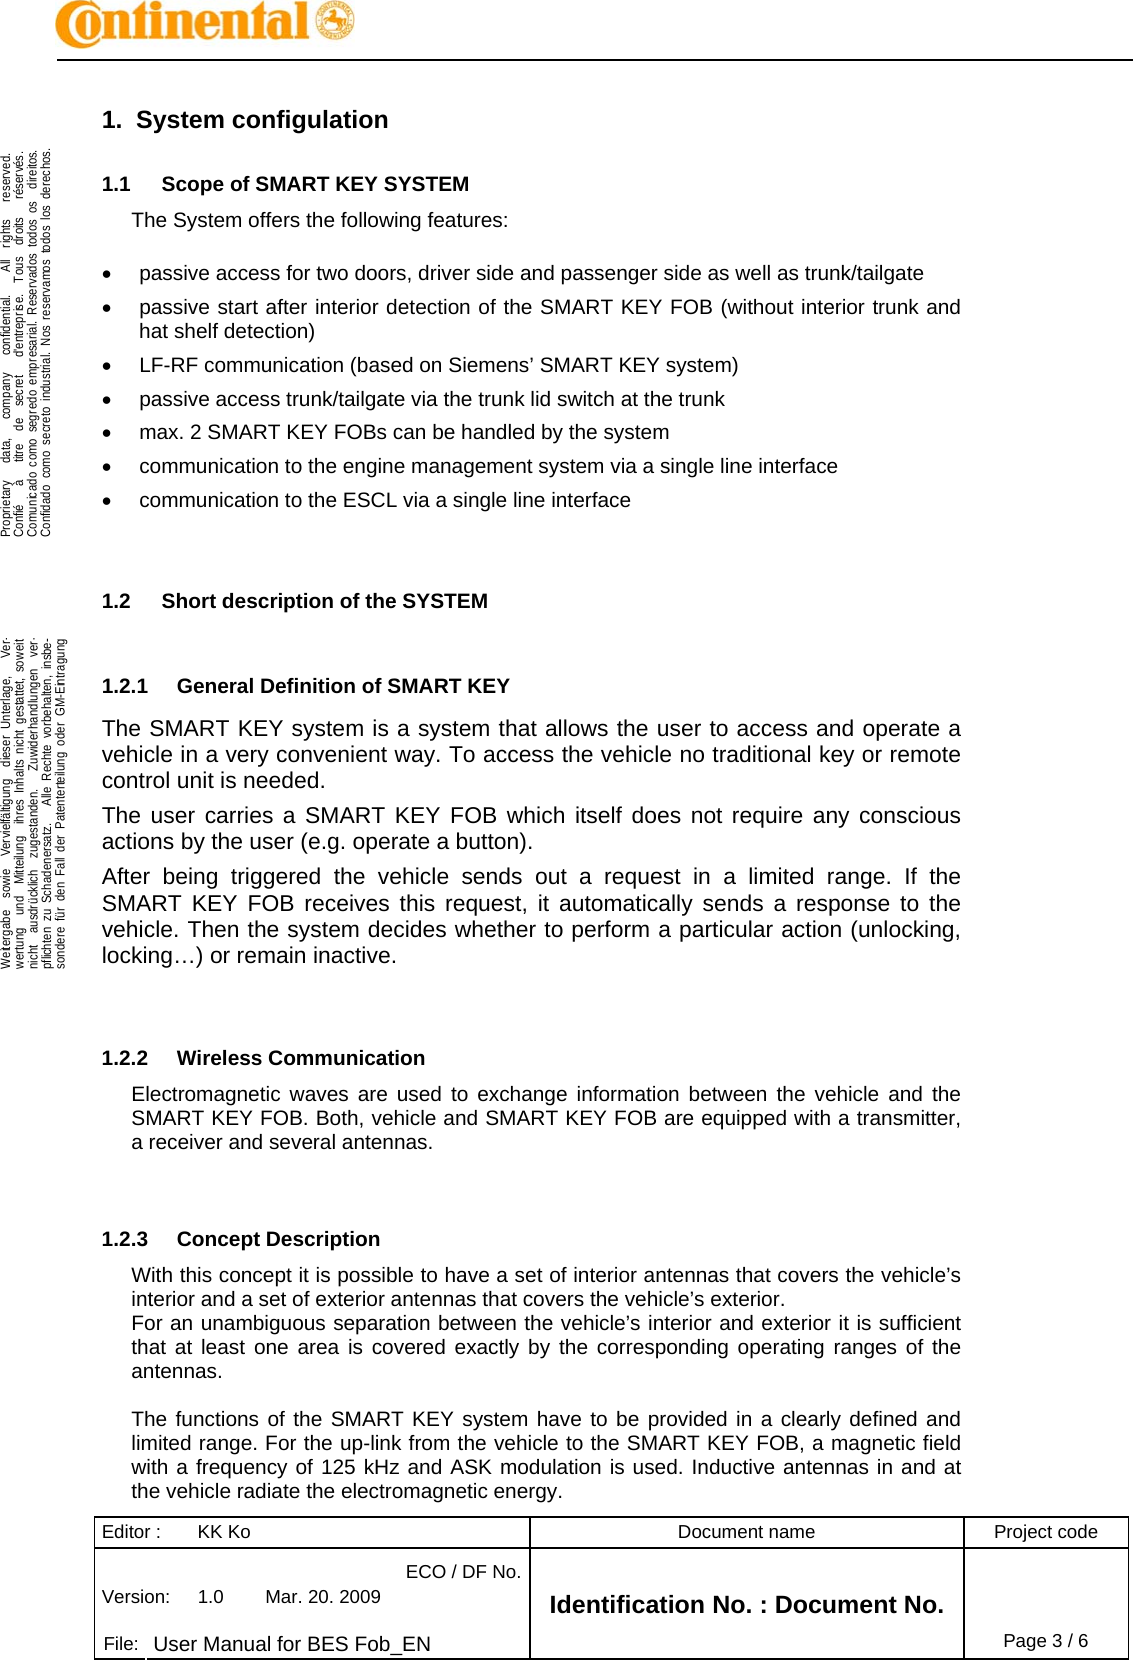 Editor :  KK Ko  Document name  Project code ECO / DF No.Version:  1.0  Mar. 20. 2009    File:  User Manual for BES Fob_EN Identification No. : Document No. Page 3 / 6    .Proprietary   data,   company   confidential.    All  rights   reserved.Confié   à   titre  de  secret   d&apos;entreprise.  Tous  droits   réservés.Comunicado como segredo empresarial. Reservados todos os  direitos.Confidado como secreto industrial. Nos reservamos todos los derechos.  .Weitergabe  sowie  Vervielfältigung  dieser Unterlage,   Ver-wertung  und  Mitteilung  ihres Inhalts nicht gestattet, soweitnicht  ausdrücklich  zugestanden.   Zuwiderhandlungen  ver-pflichten zu Schadenersatz.   Alle Rechte vorbehalten, insbe-sondere für den Fall der Patenterteilung oder GM-Eintragung  1. System configulation 1.1  Scope of SMART KEY SYSTEM The System offers the following features:  •  passive access for two doors, driver side and passenger side as well as trunk/tailgate •  passive start after interior detection of the SMART KEY FOB (without interior trunk and hat shelf detection) •  LF-RF communication (based on Siemens’ SMART KEY system) •  passive access trunk/tailgate via the trunk lid switch at the trunk •  max. 2 SMART KEY FOBs can be handled by the system •  communication to the engine management system via a single line interface •  communication to the ESCL via a single line interface   1.2  Short description of the SYSTEM  1.2.1  General Definition of SMART KEY The SMART KEY system is a system that allows the user to access and operate a vehicle in a very convenient way. To access the vehicle no traditional key or remote control unit is needed.  The user carries a SMART KEY FOB which itself does not require any conscious actions by the user (e.g. operate a button).  After being triggered the vehicle sends out a request in a limited range. If the SMART KEY FOB receives this request, it automatically sends a response to the vehicle. Then the system decides whether to perform a particular action (unlocking, locking…) or remain inactive.   1.2.2 Wireless Communication Electromagnetic waves are used to exchange information between the vehicle and the SMART KEY FOB. Both, vehicle and SMART KEY FOB are equipped with a transmitter, a receiver and several antennas.    1.2.3 Concept Description With this concept it is possible to have a set of interior antennas that covers the vehicle’s interior and a set of exterior antennas that covers the vehicle’s exterior. For an unambiguous separation between the vehicle’s interior and exterior it is sufficient that at least one area is covered exactly by the corresponding operating ranges of the antennas.  The functions of the SMART KEY system have to be provided in a clearly defined and limited range. For the up-link from the vehicle to the SMART KEY FOB, a magnetic field with a frequency of 125 kHz and ASK modulation is used. Inductive antennas in and at the vehicle radiate the electromagnetic energy. 